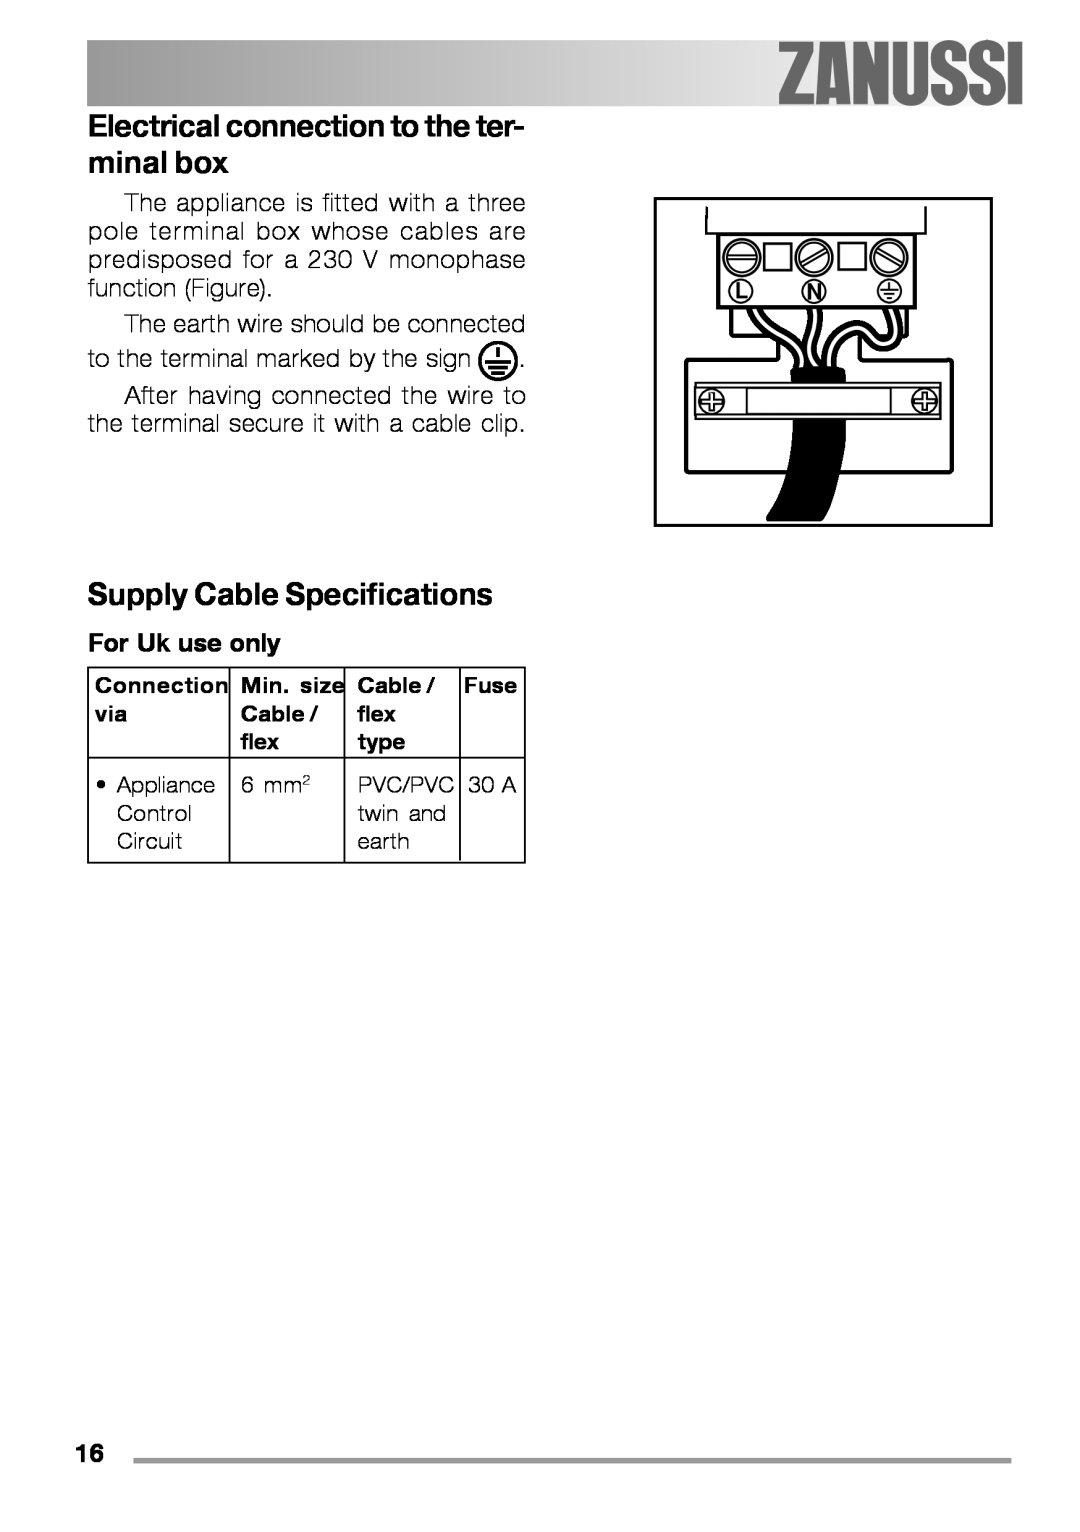 Zanussi ZEL 640 manual Electrical connection to the ter- minal box, Supply Cable Specifications, For Uk use only 